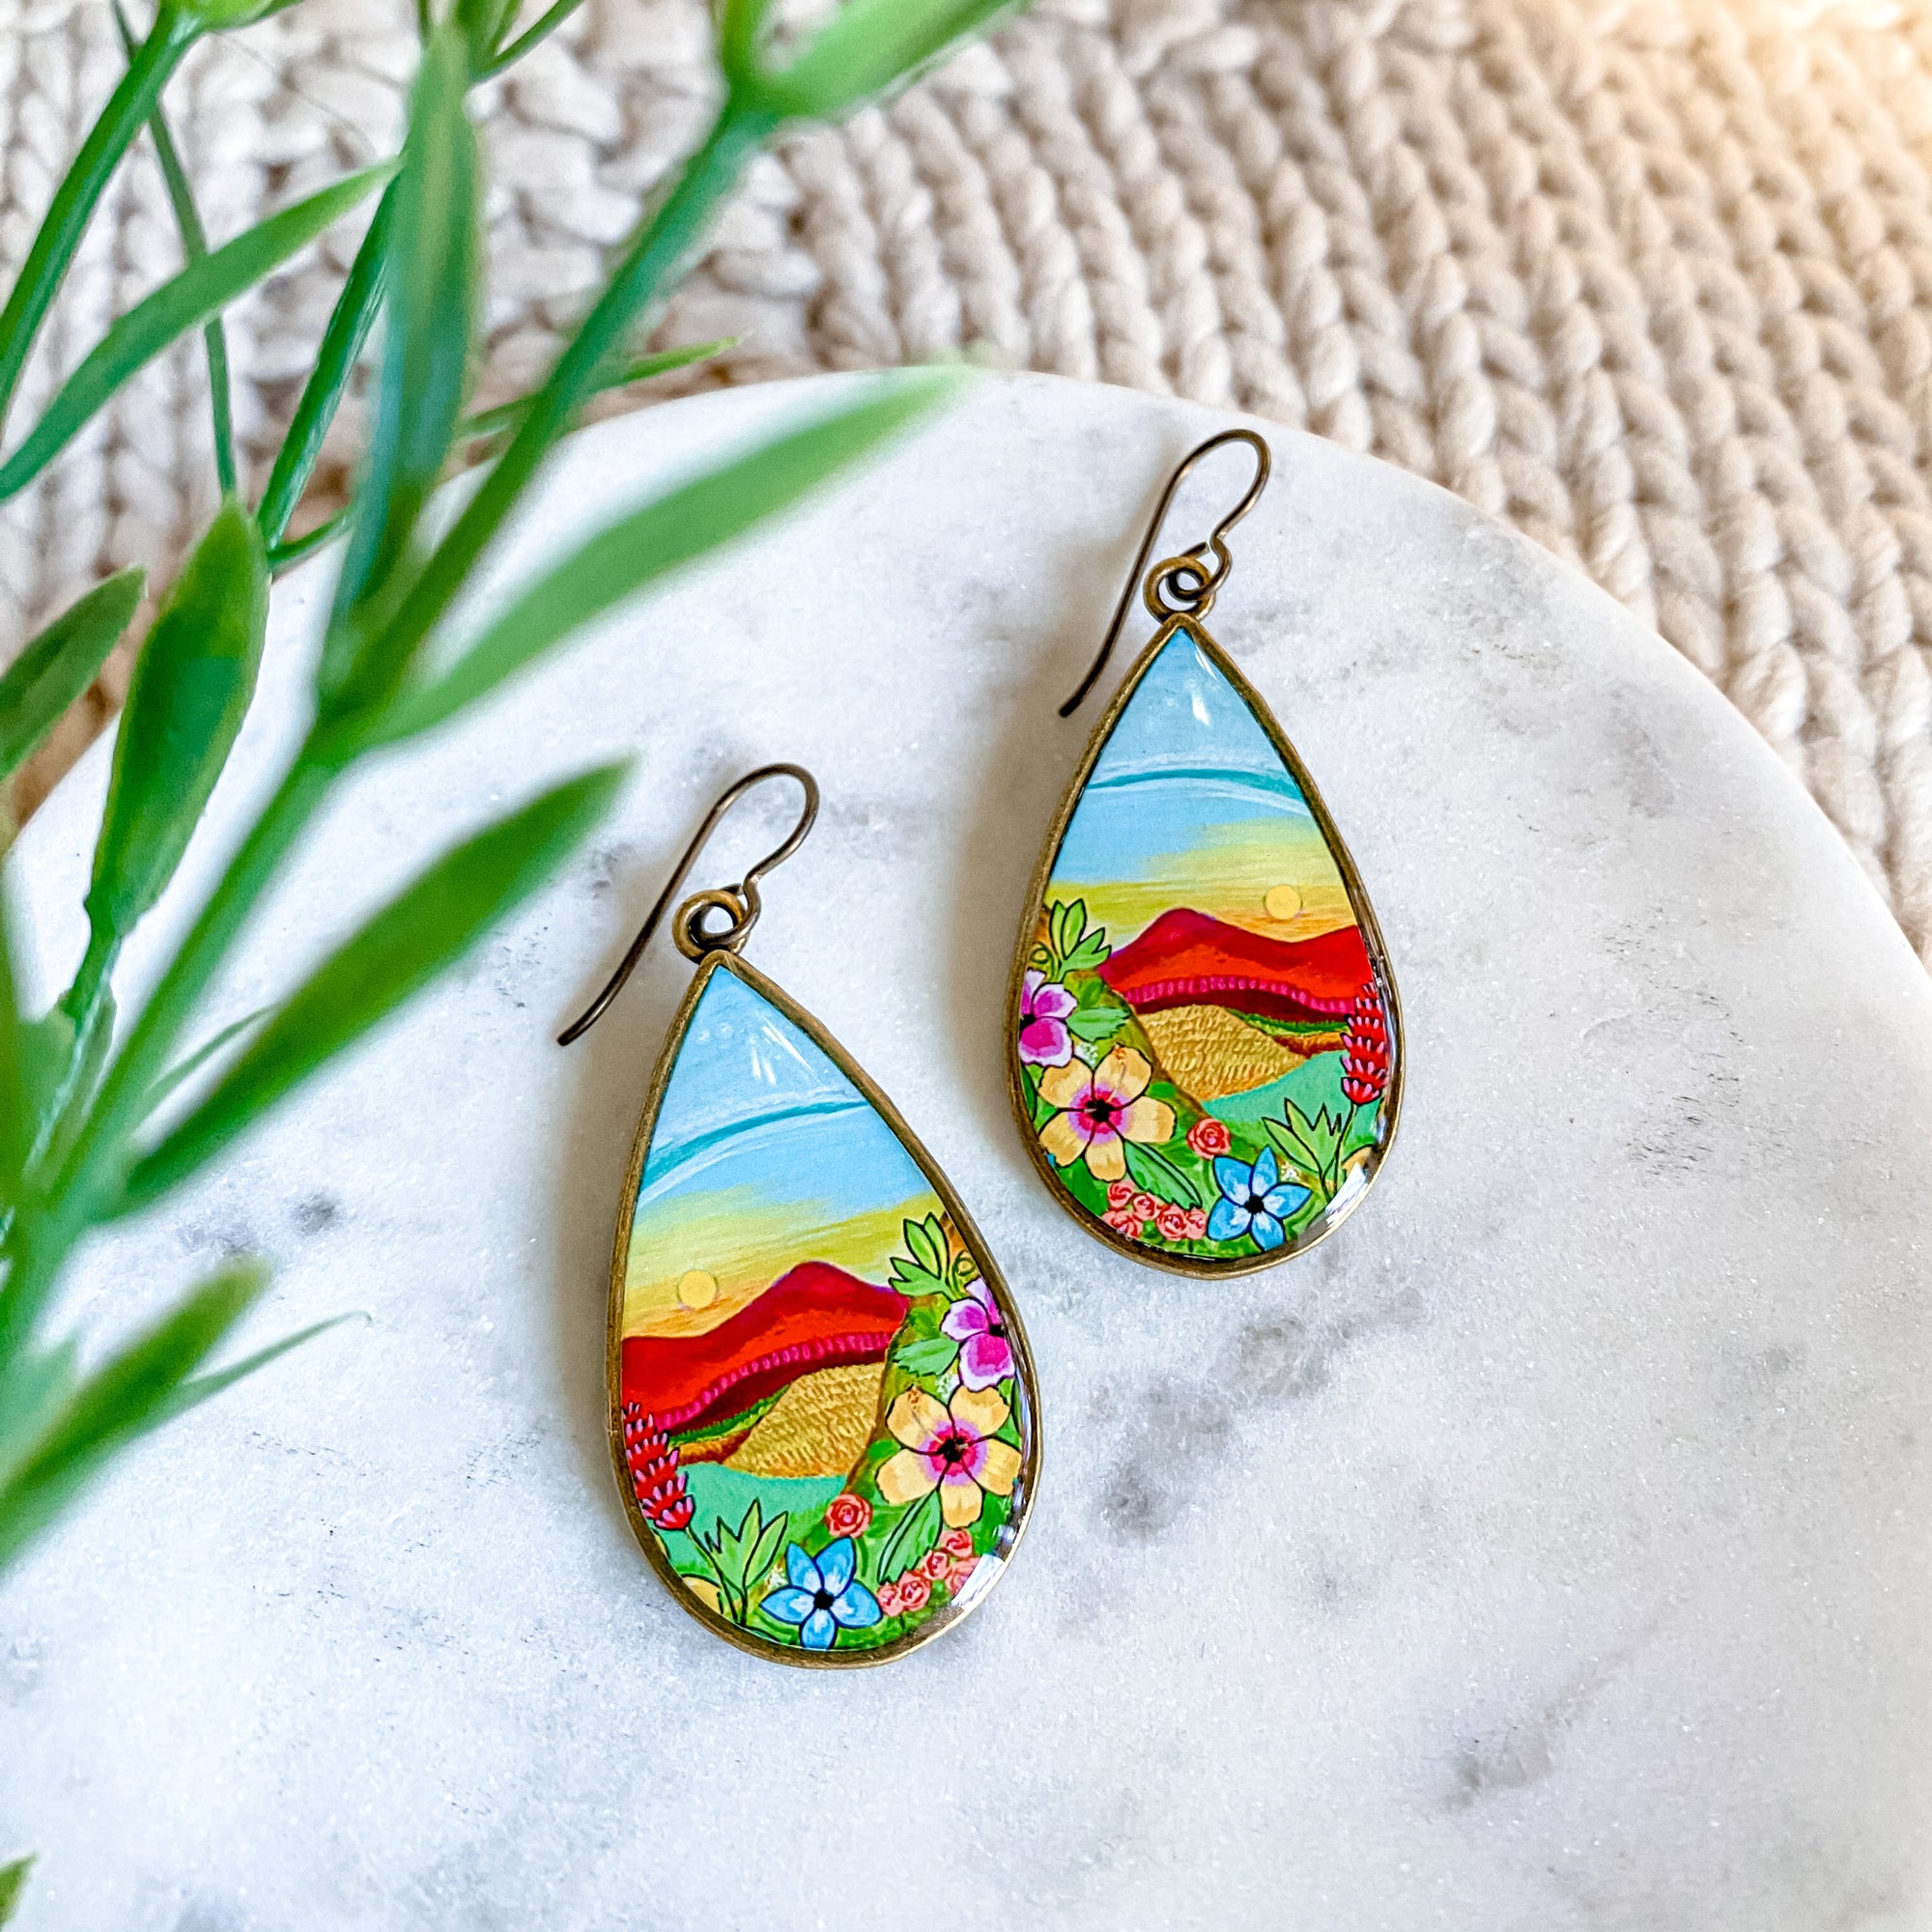 a pair of earrings with a painting on them